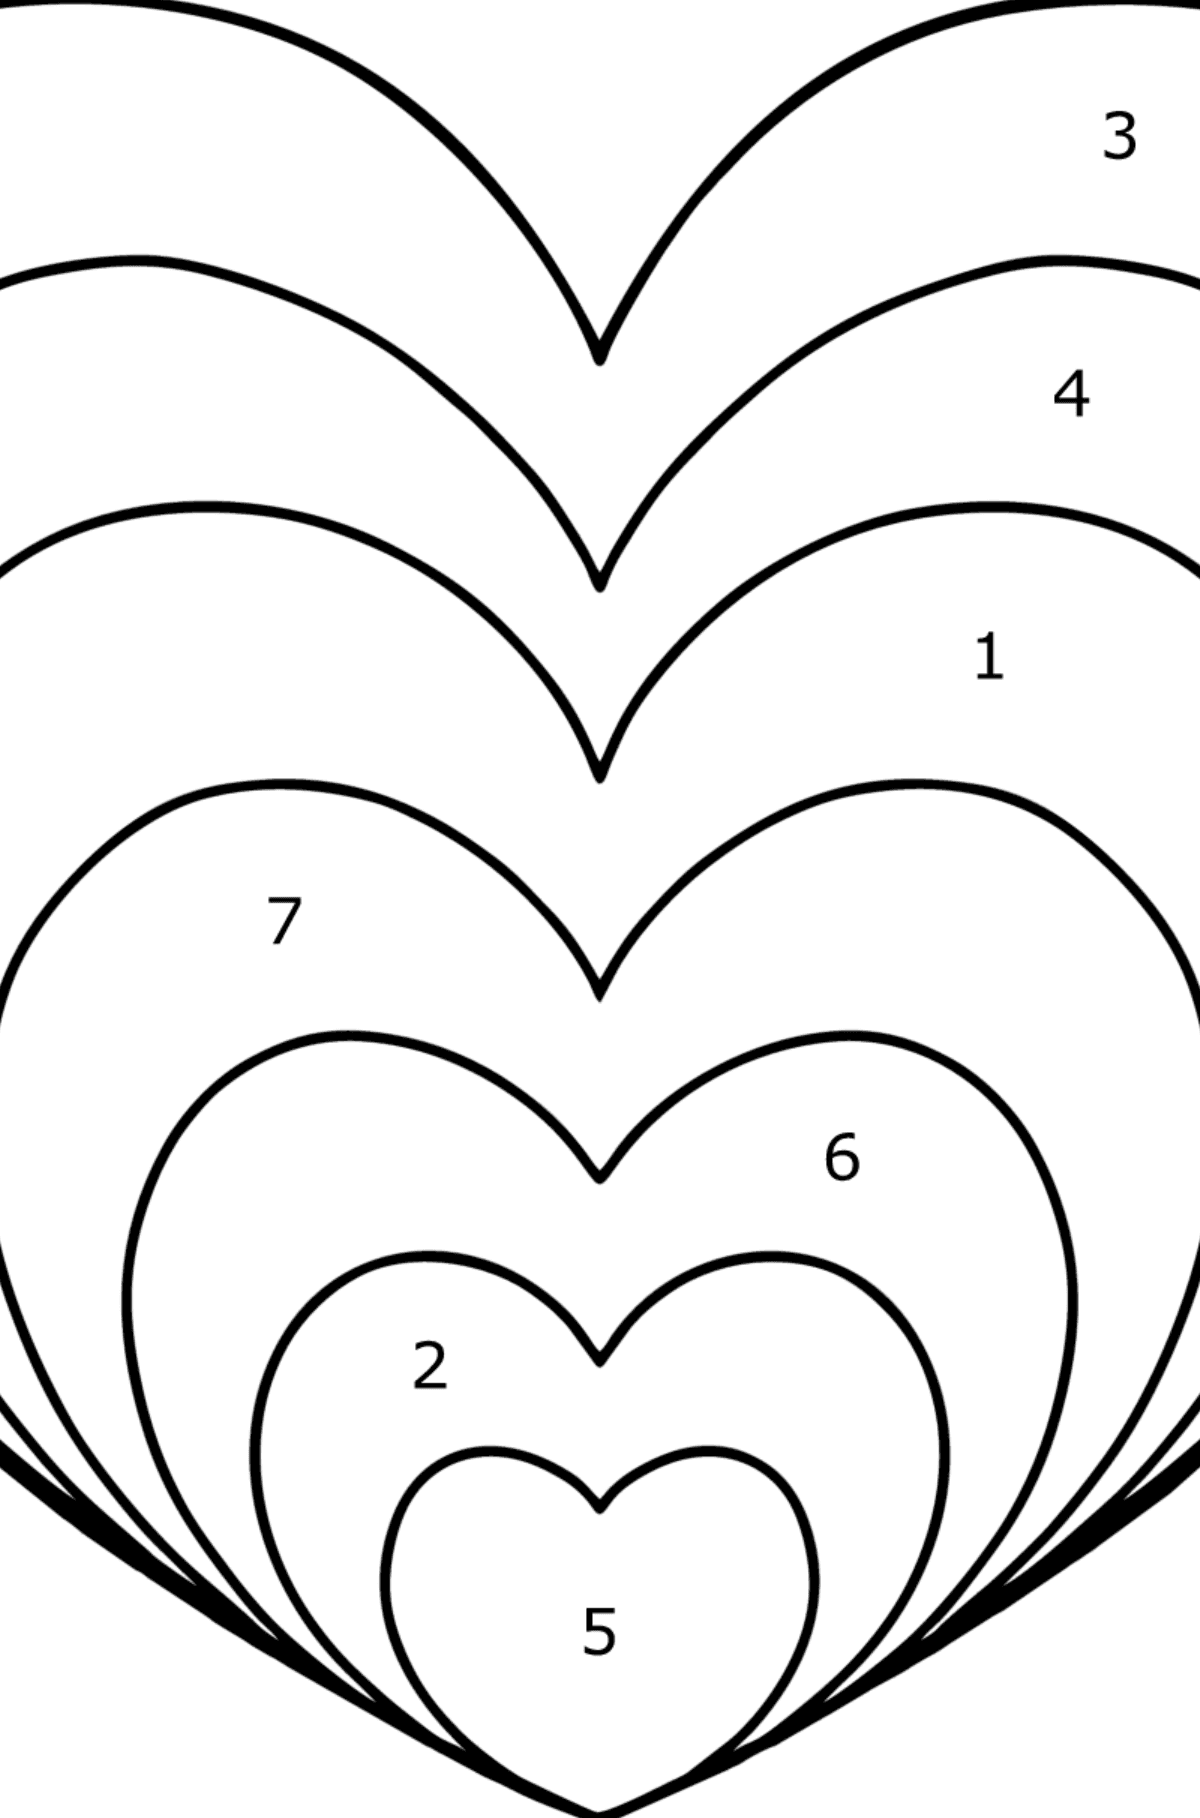 Simple Zen heart coloring page - Coloring by Numbers for Kids